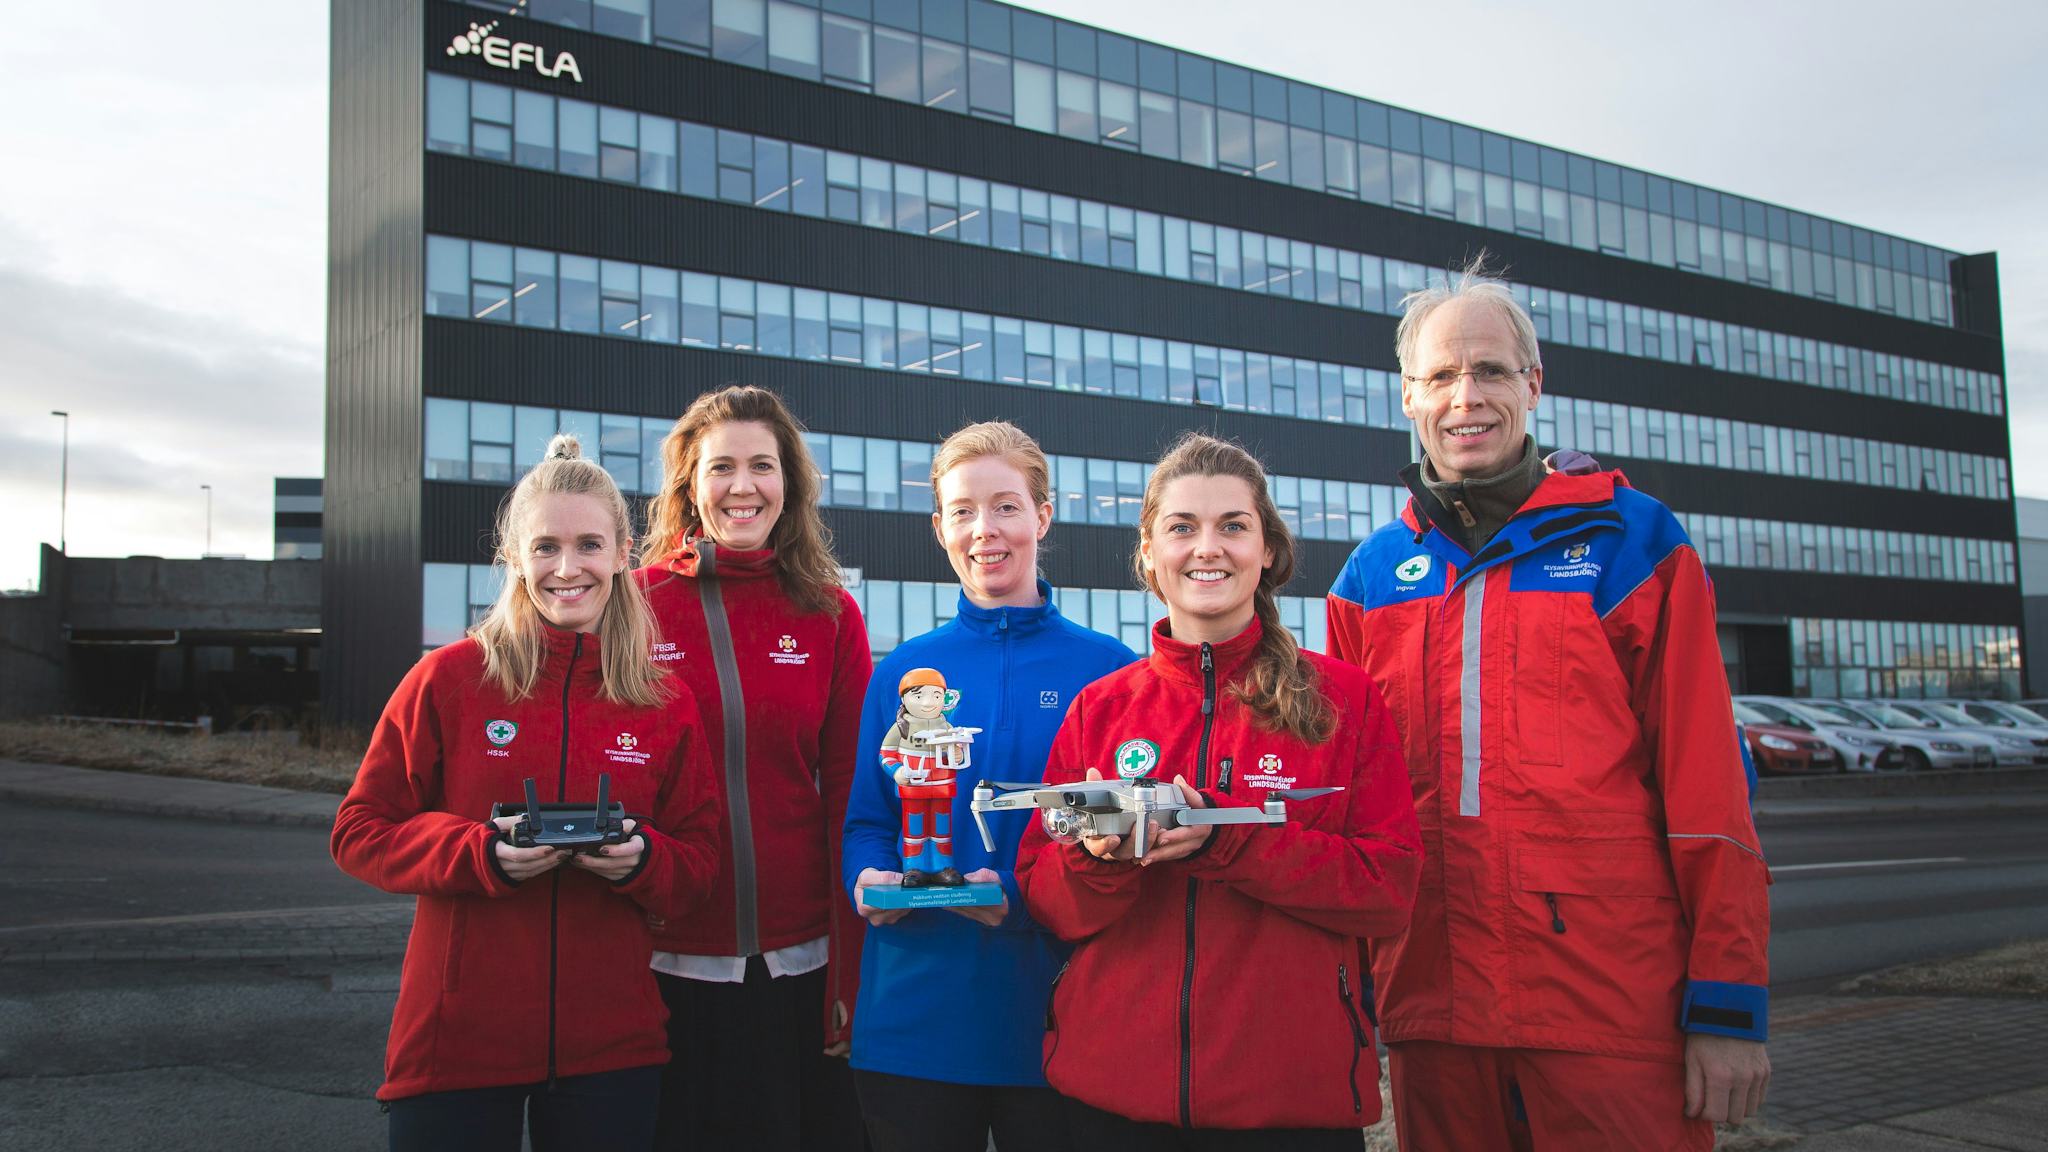 A group of people in red and blue jackets holding drones, in front of a modern building 